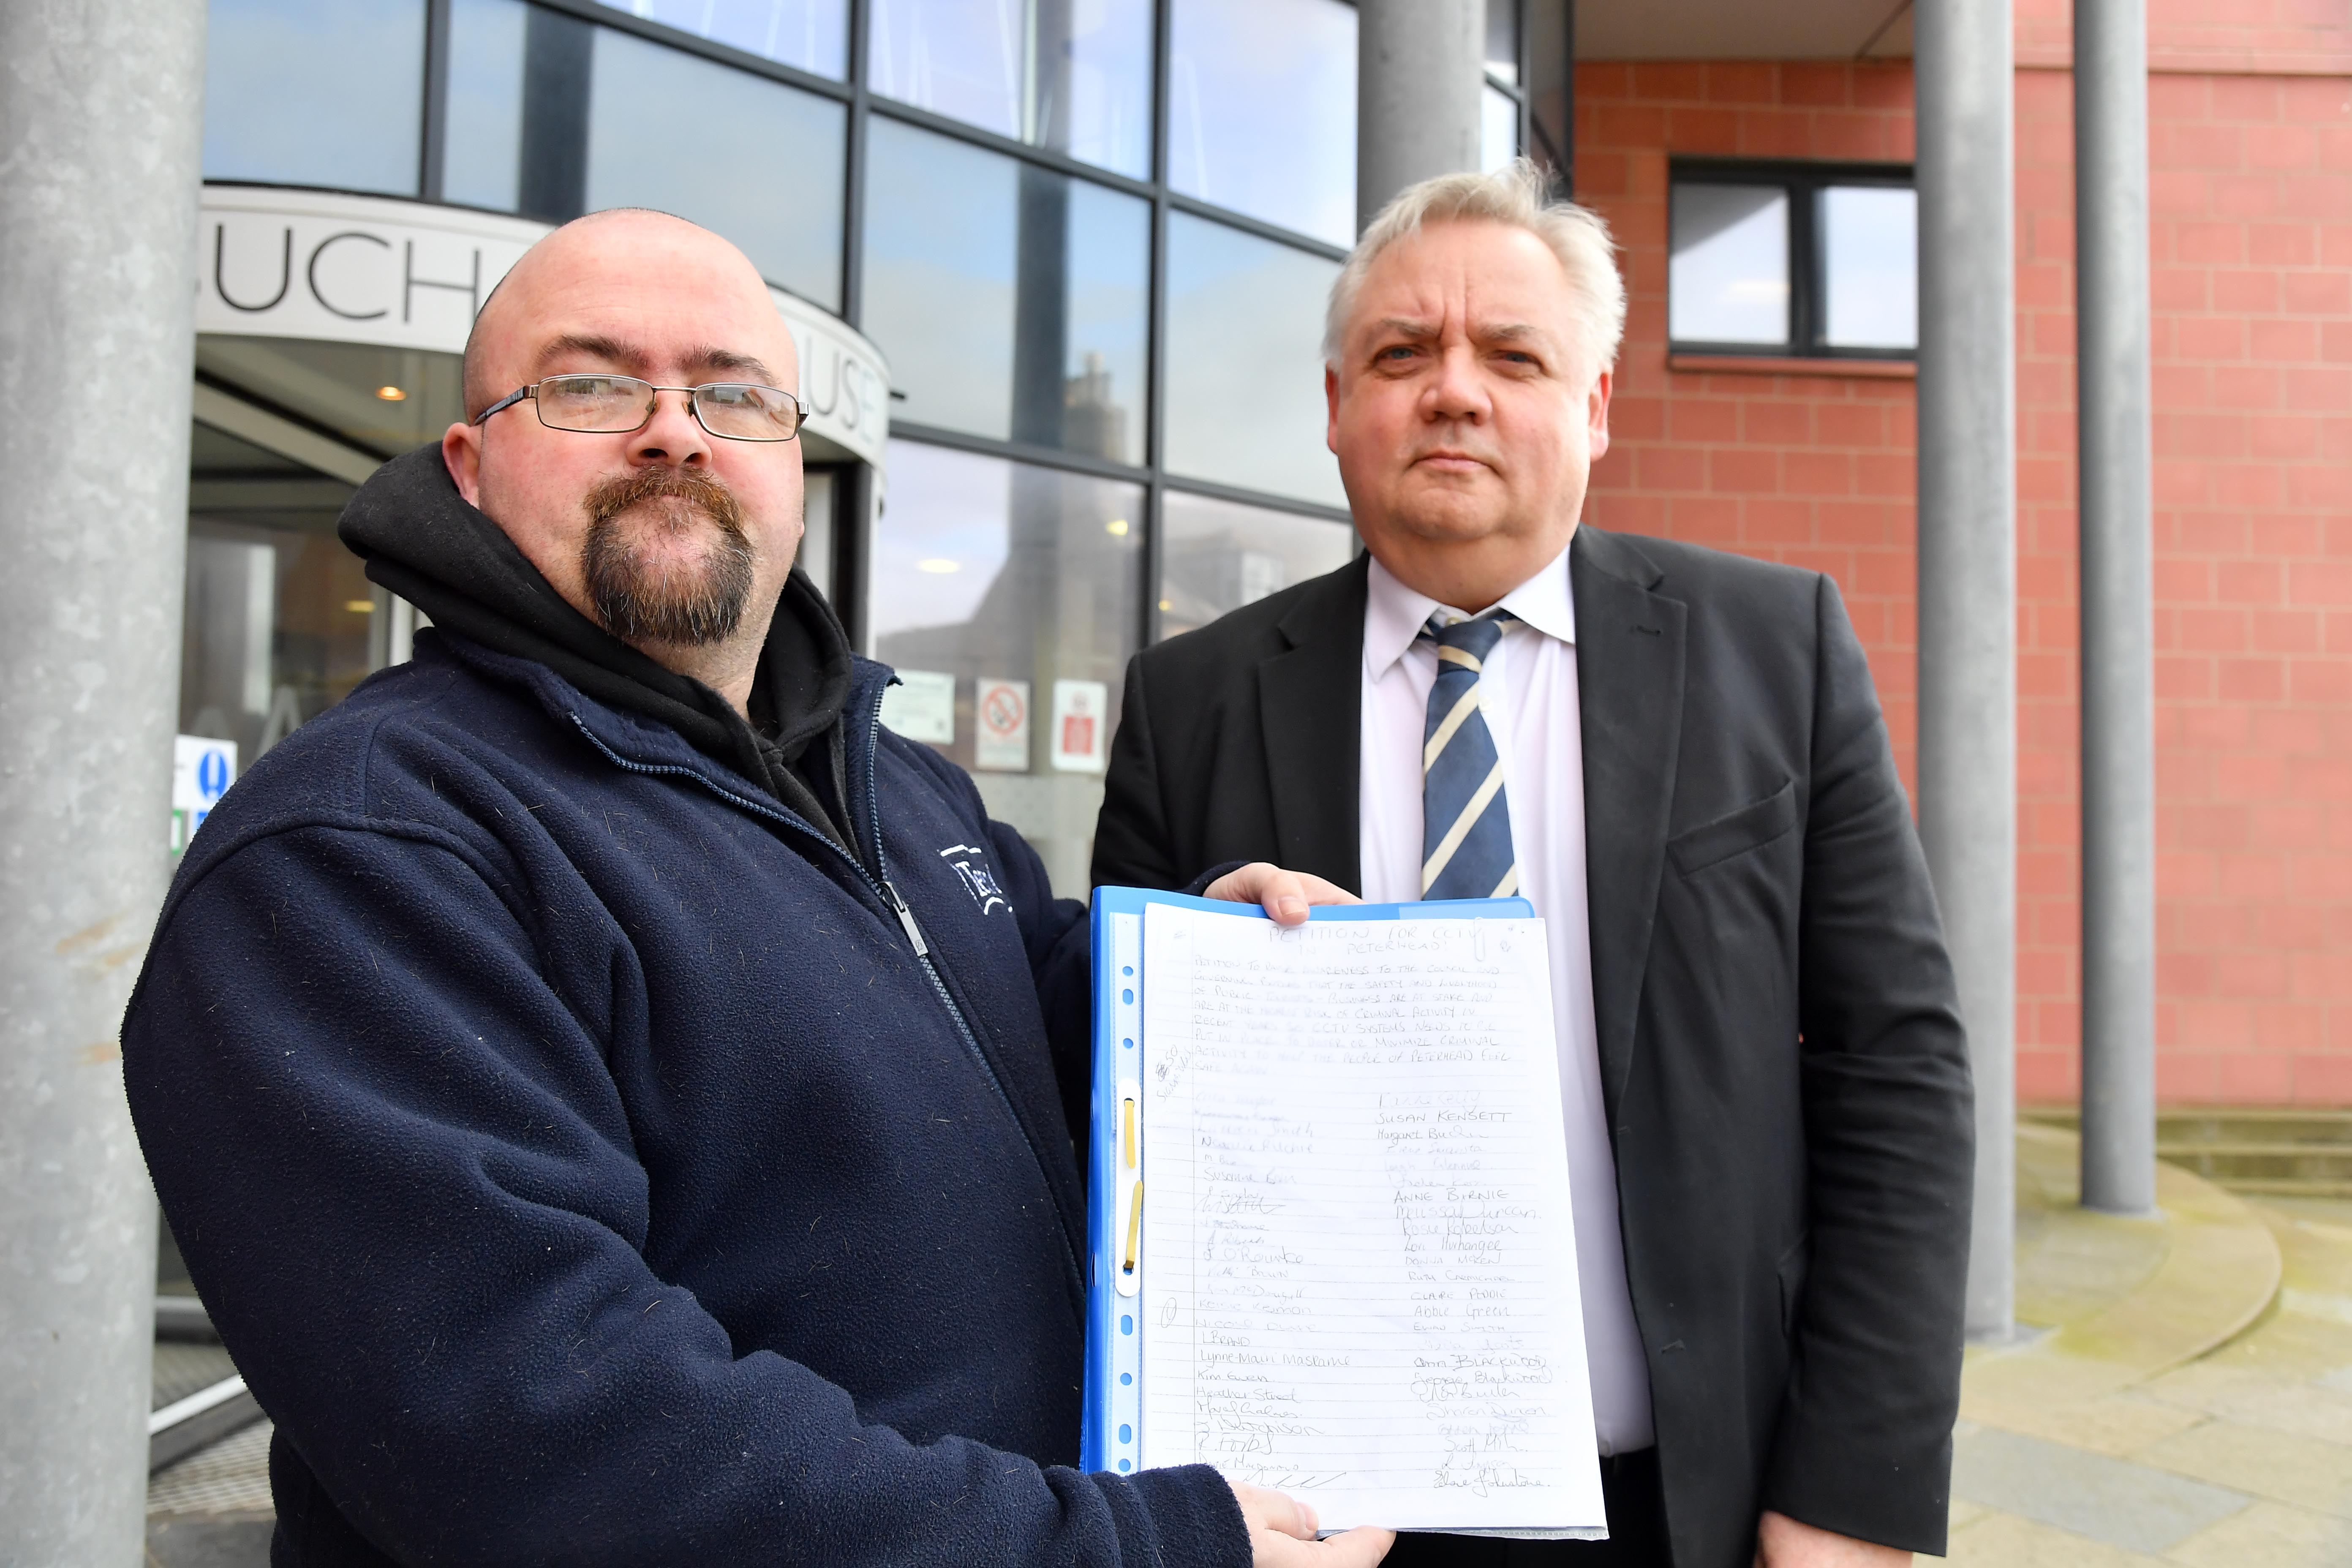 Gilbert Burnett presents the CCTV petition to Chris White from Aberdeenshire Council